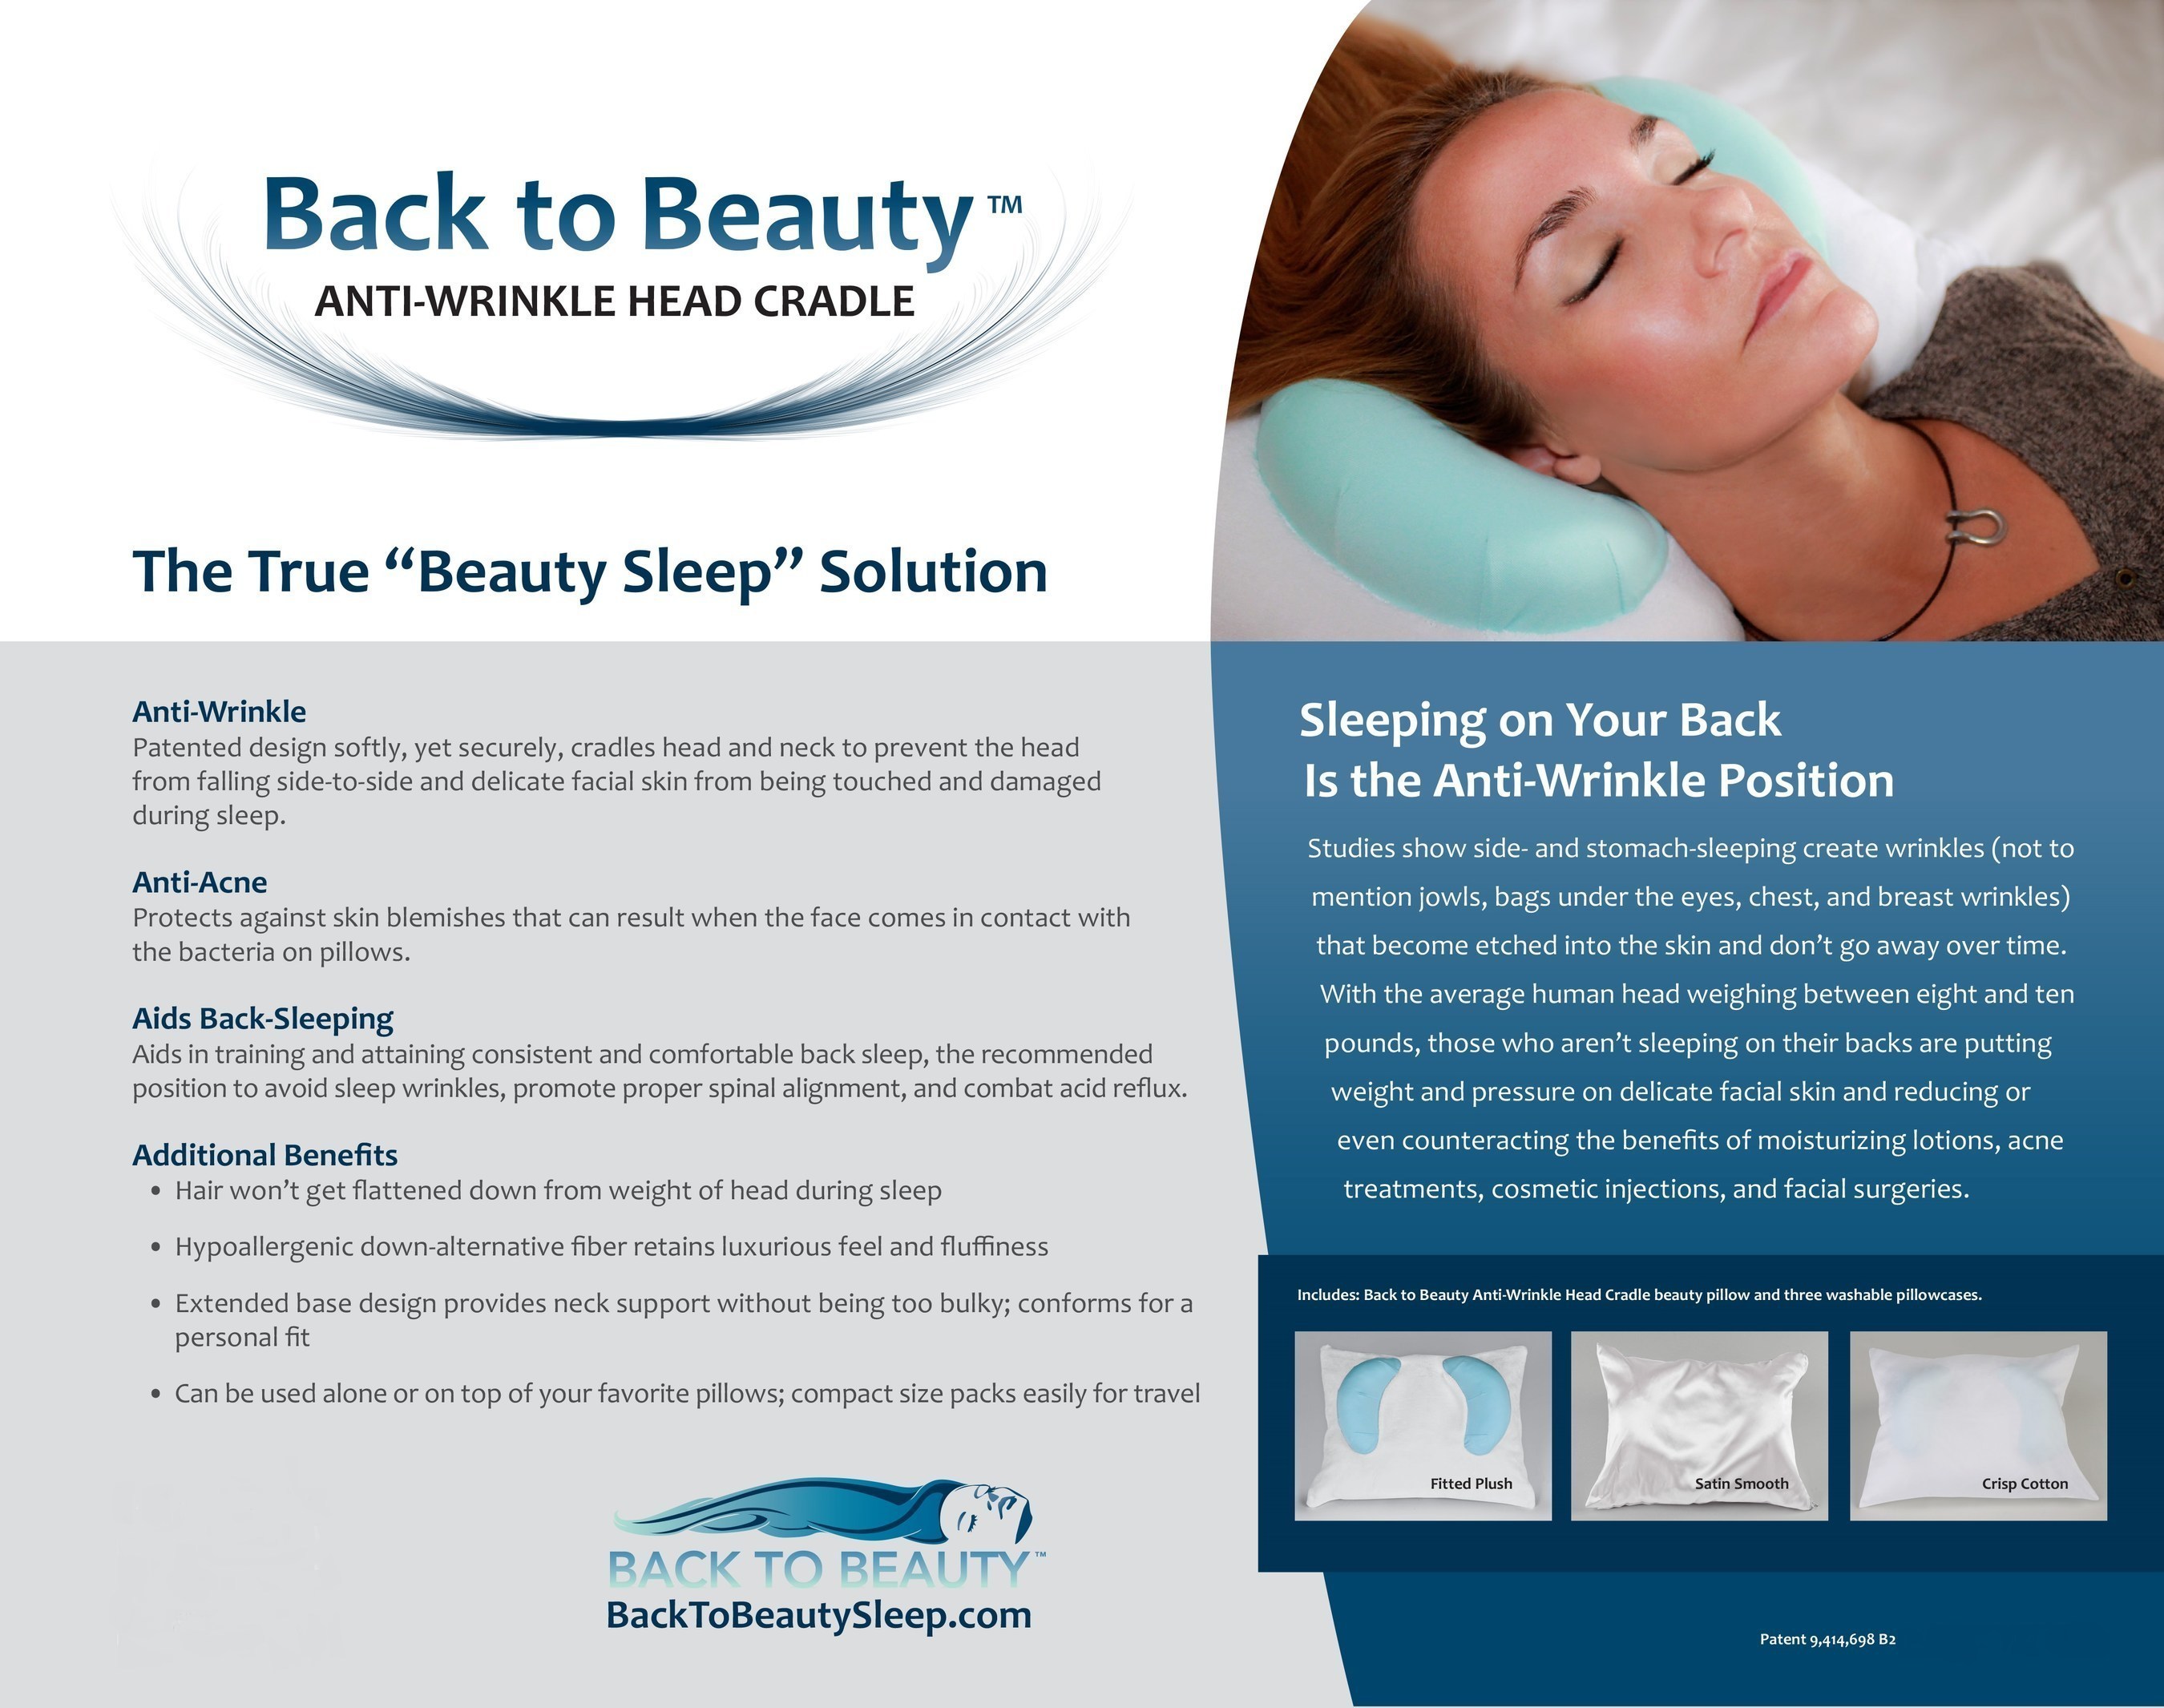 The Back to Beauty Anti-Wrinkle Head Cradle - True 'beauty sleep' is finally attainable. With the human head weighing between 8-10 pounds, it's no wonder studies show sleeping on your stomach or side creates sleep wrinkles - not to mention jowls, bags under the eyes, neck, chest and breast wrinkles - that become etched into the face and won't go away over time. The good news? The Back to Beauty Anti-Wrinkle Head Cradle beauty pillow's patented design softly, yet securely, cradles [...]